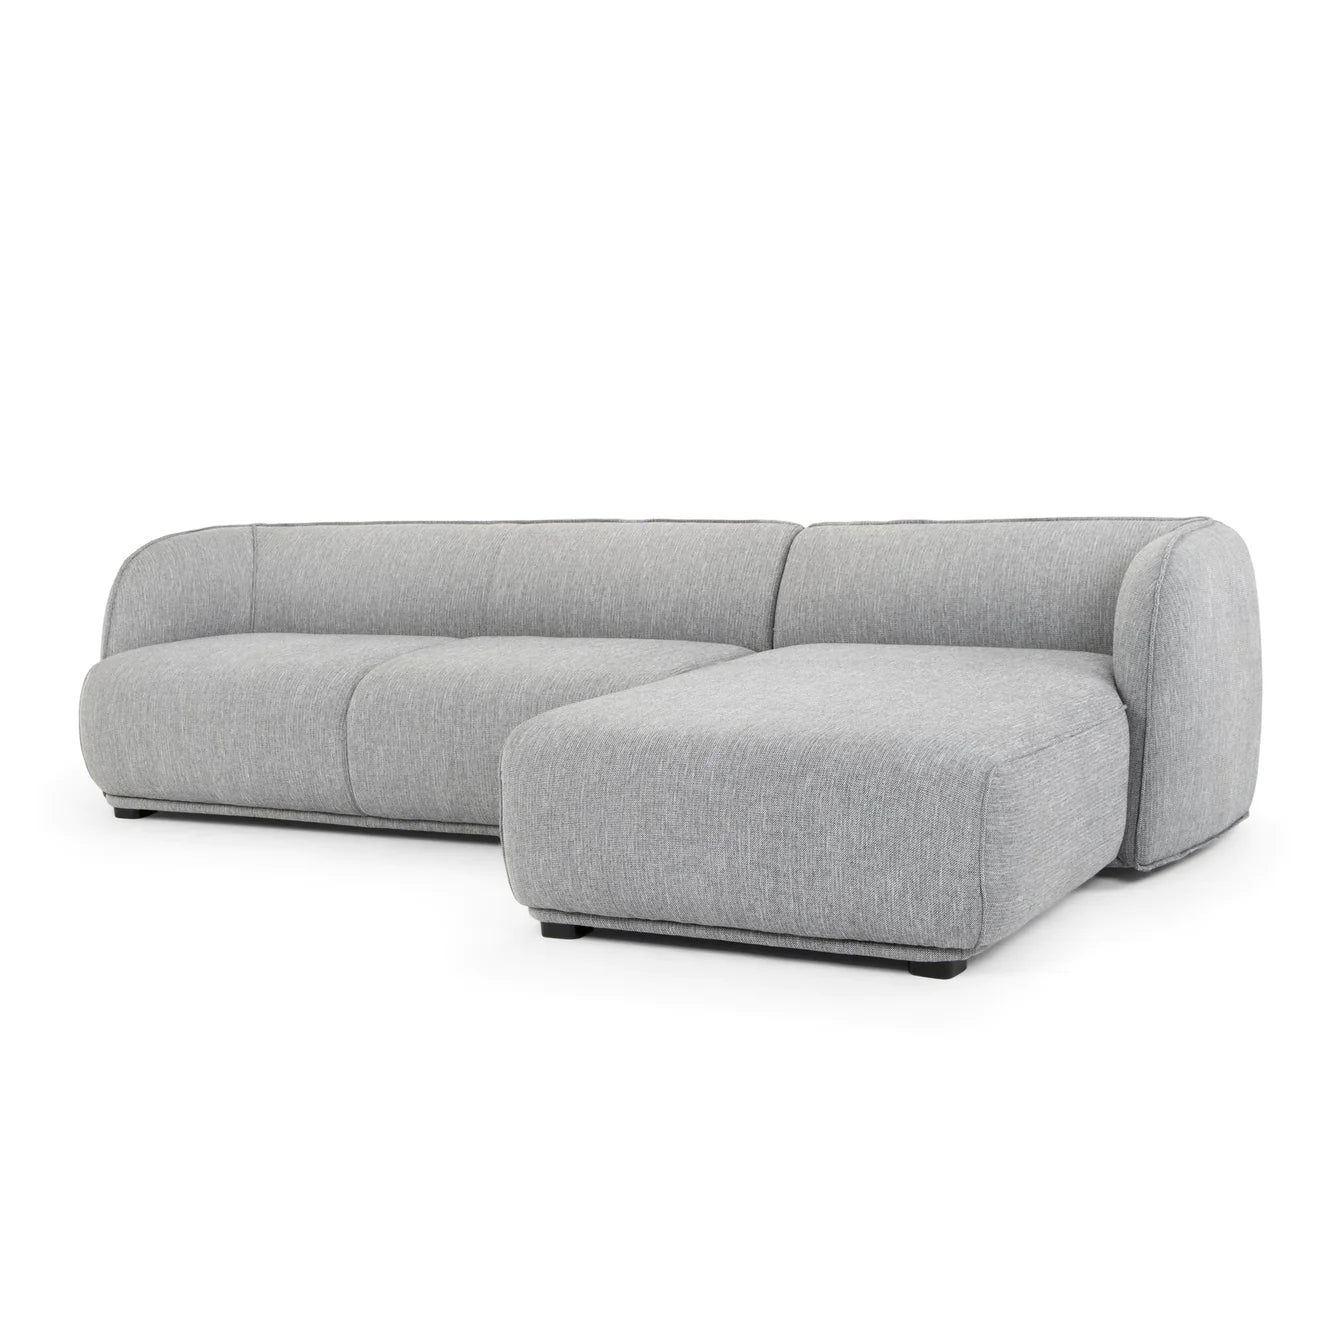 Troy 3 Seater Right Chaise Sofa (Graphite Grey)